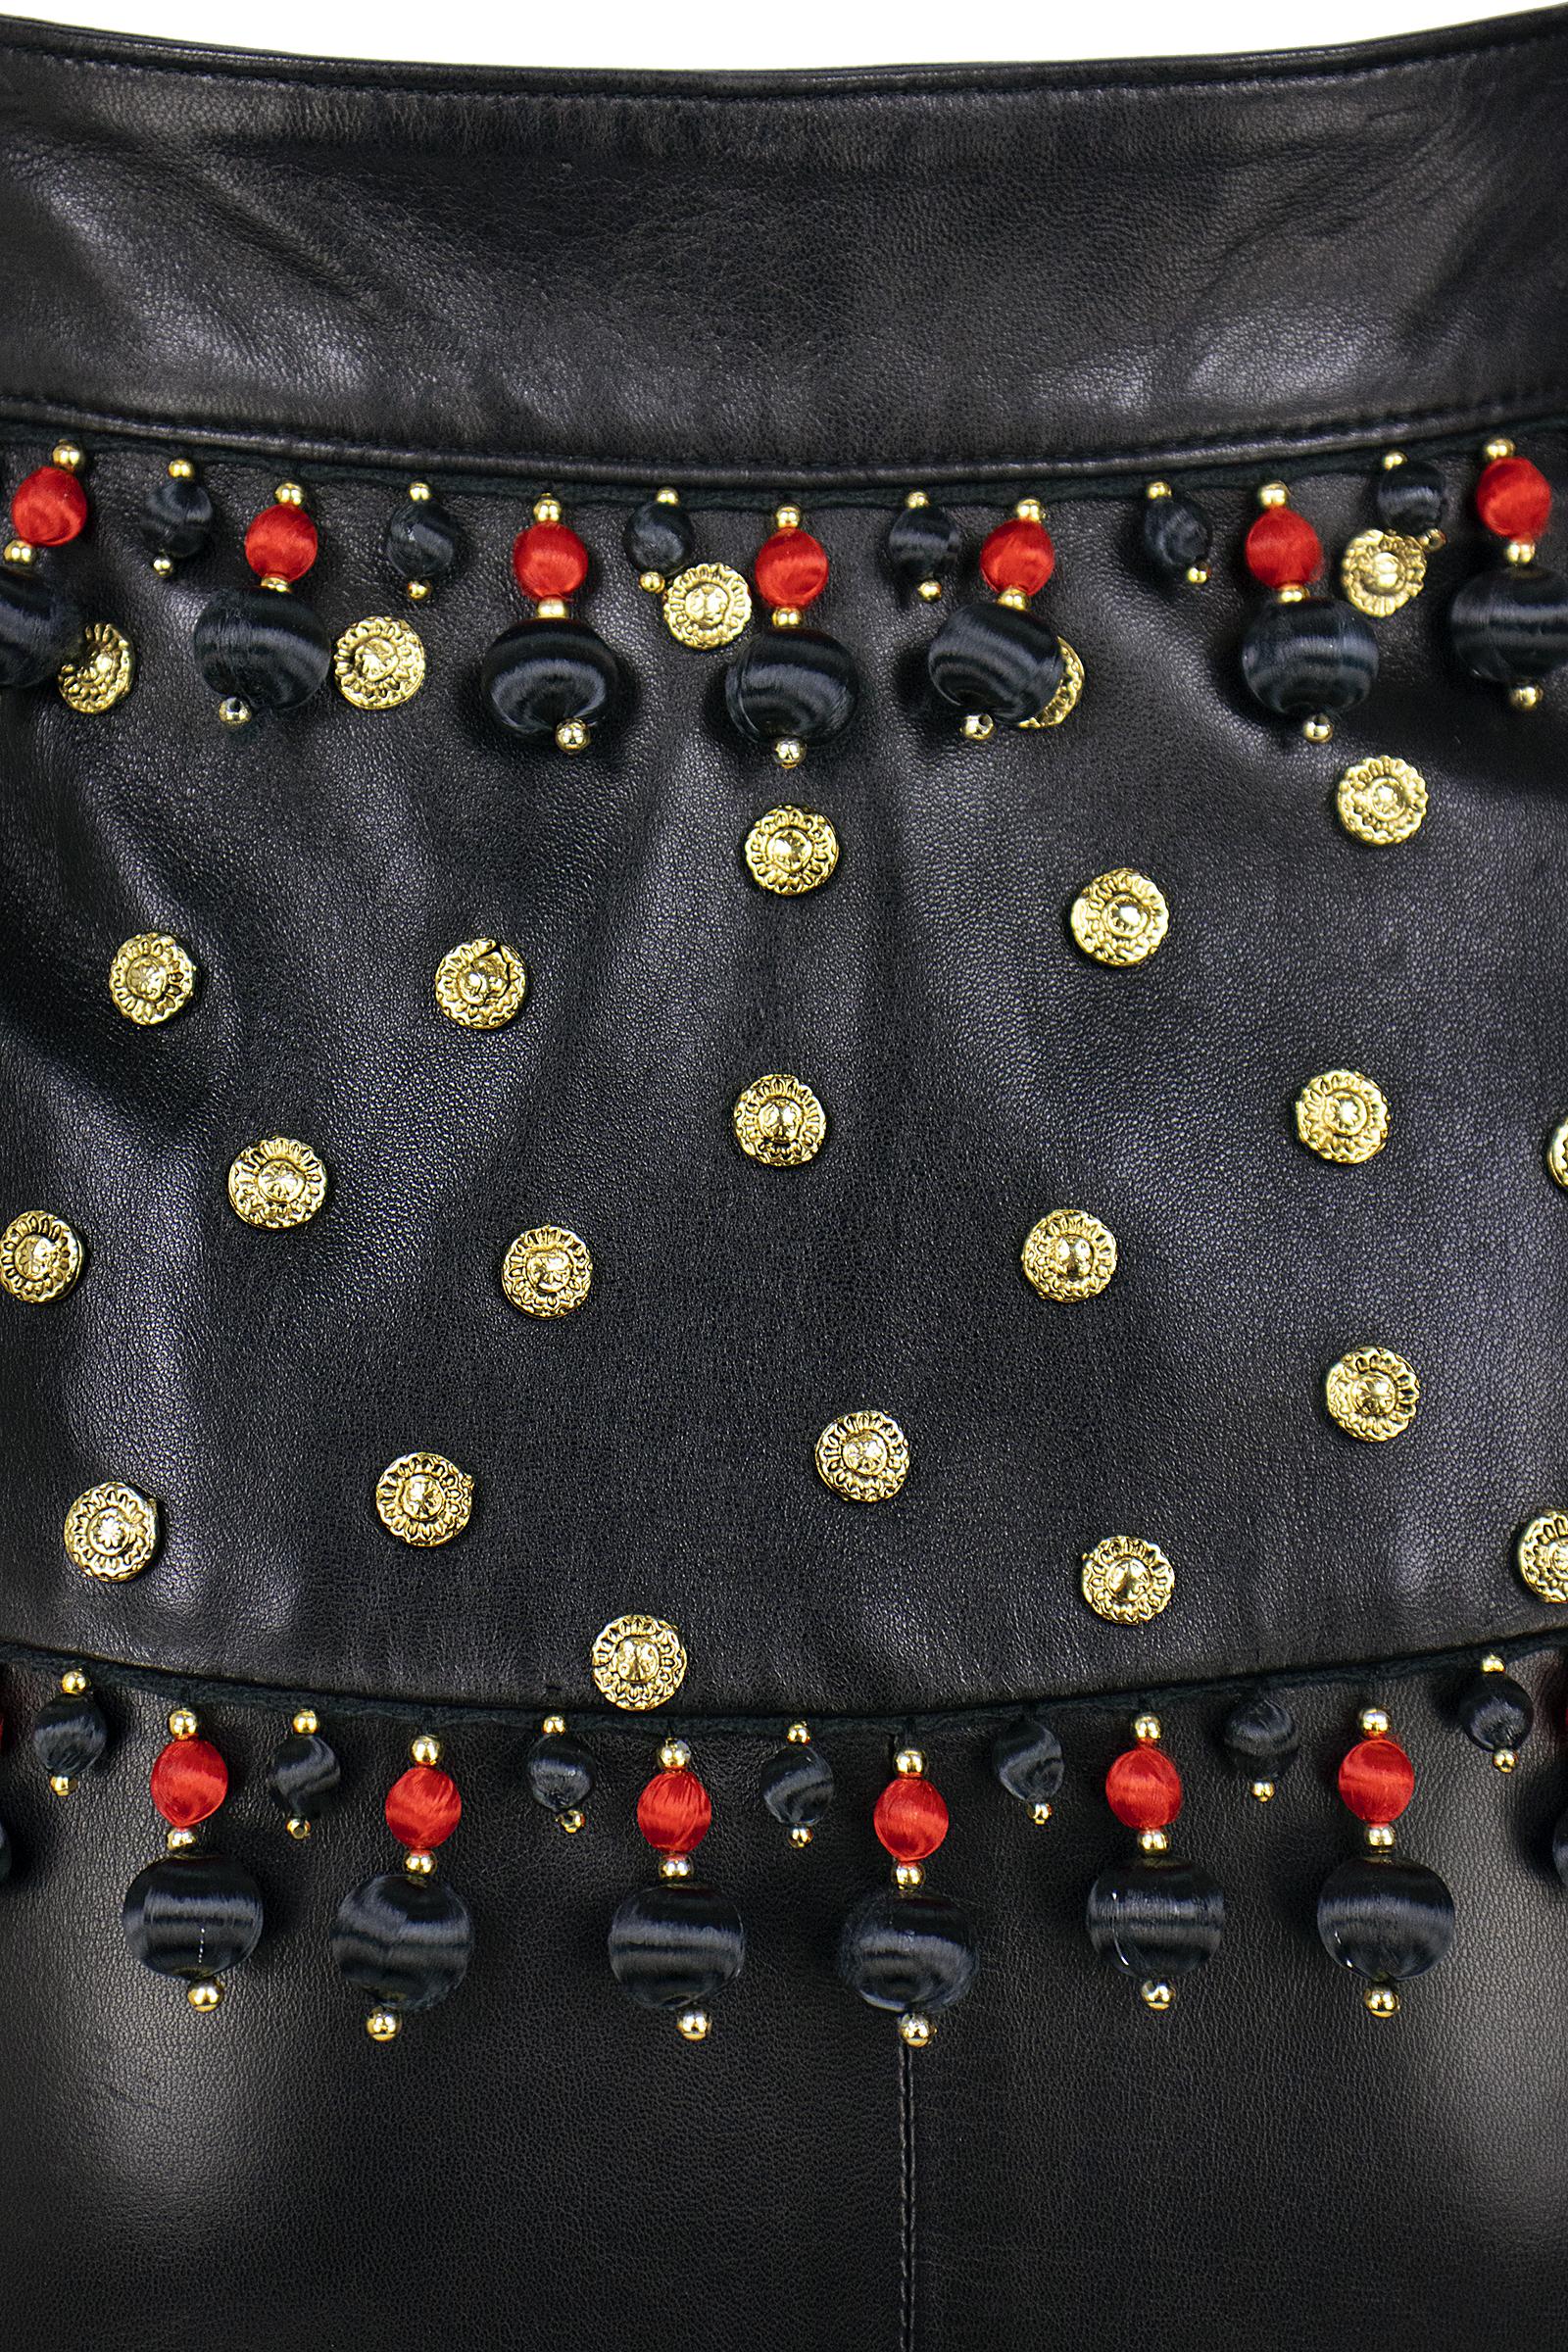 Women's Moschino Circa 1990s Black Leather Skirt with Tassels, Metal Studs and Flowers For Sale